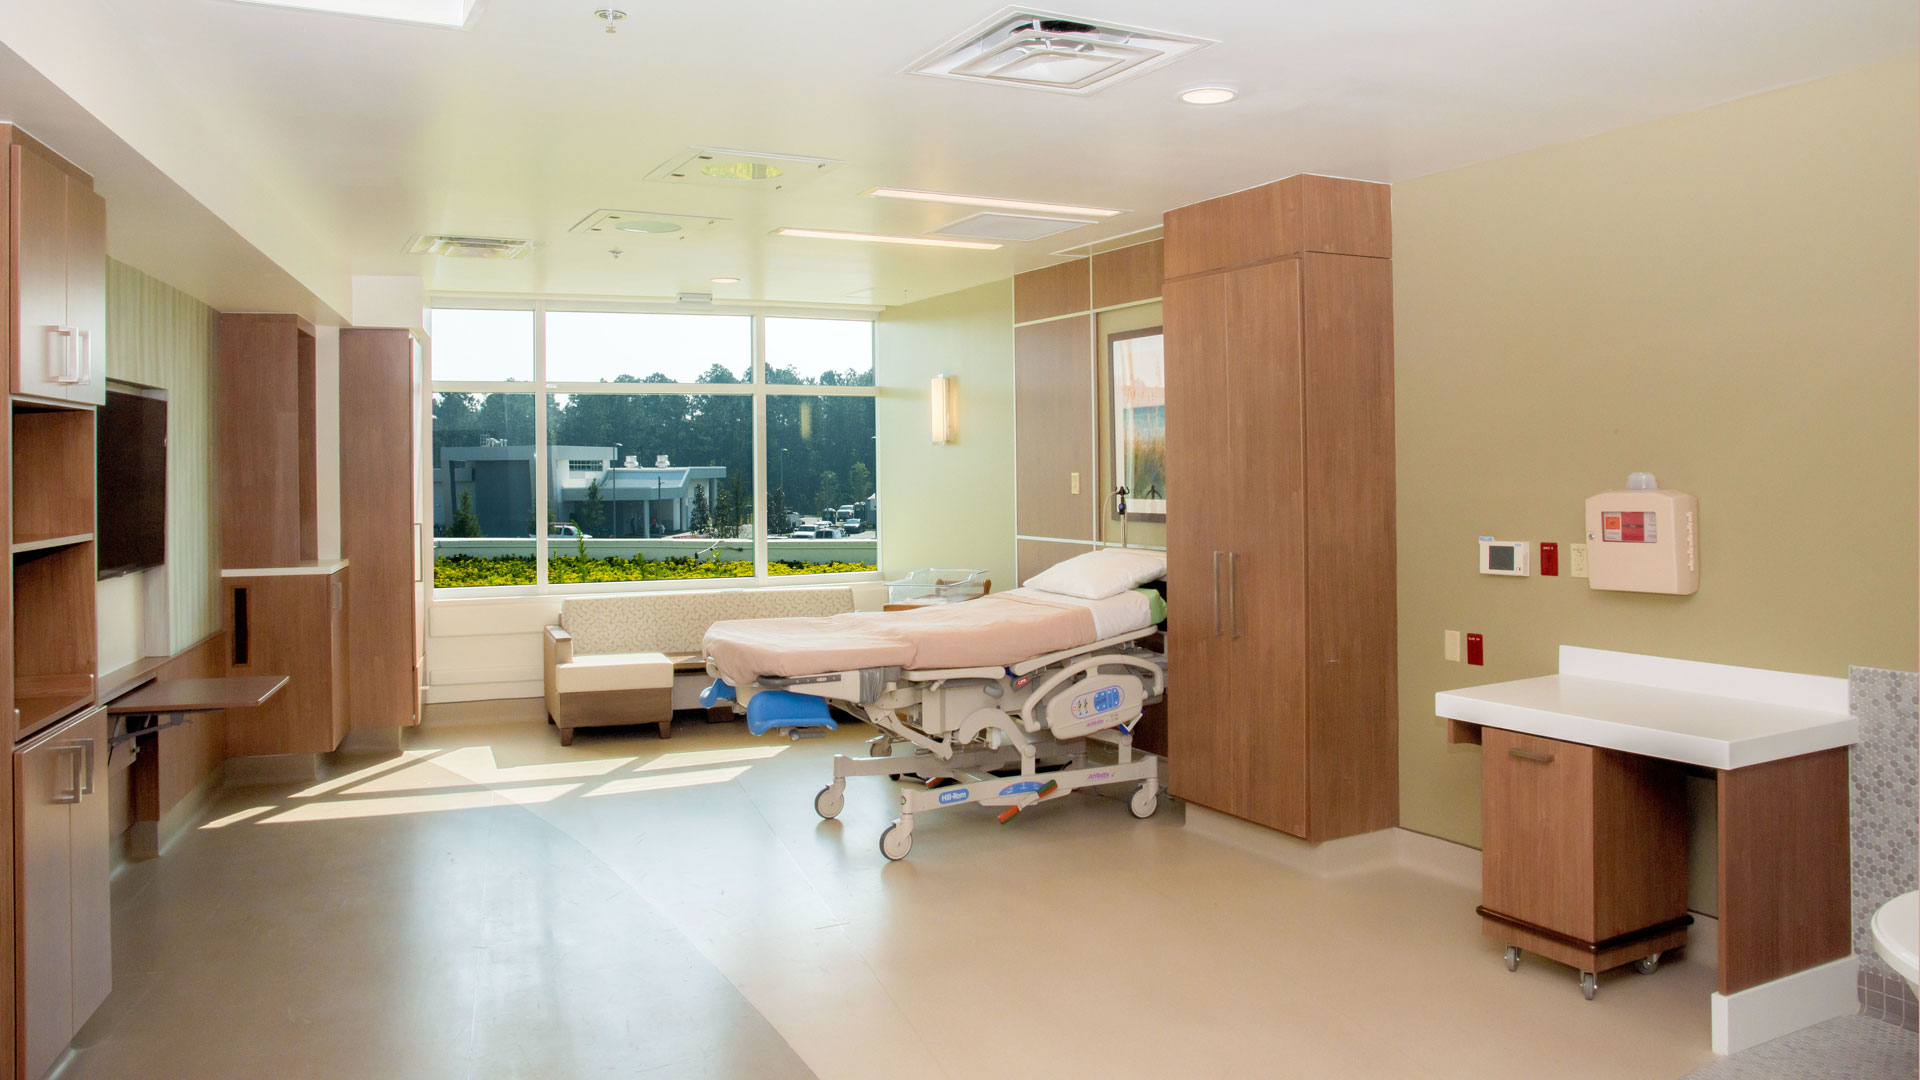 UF Health North Labor and Delivery suite